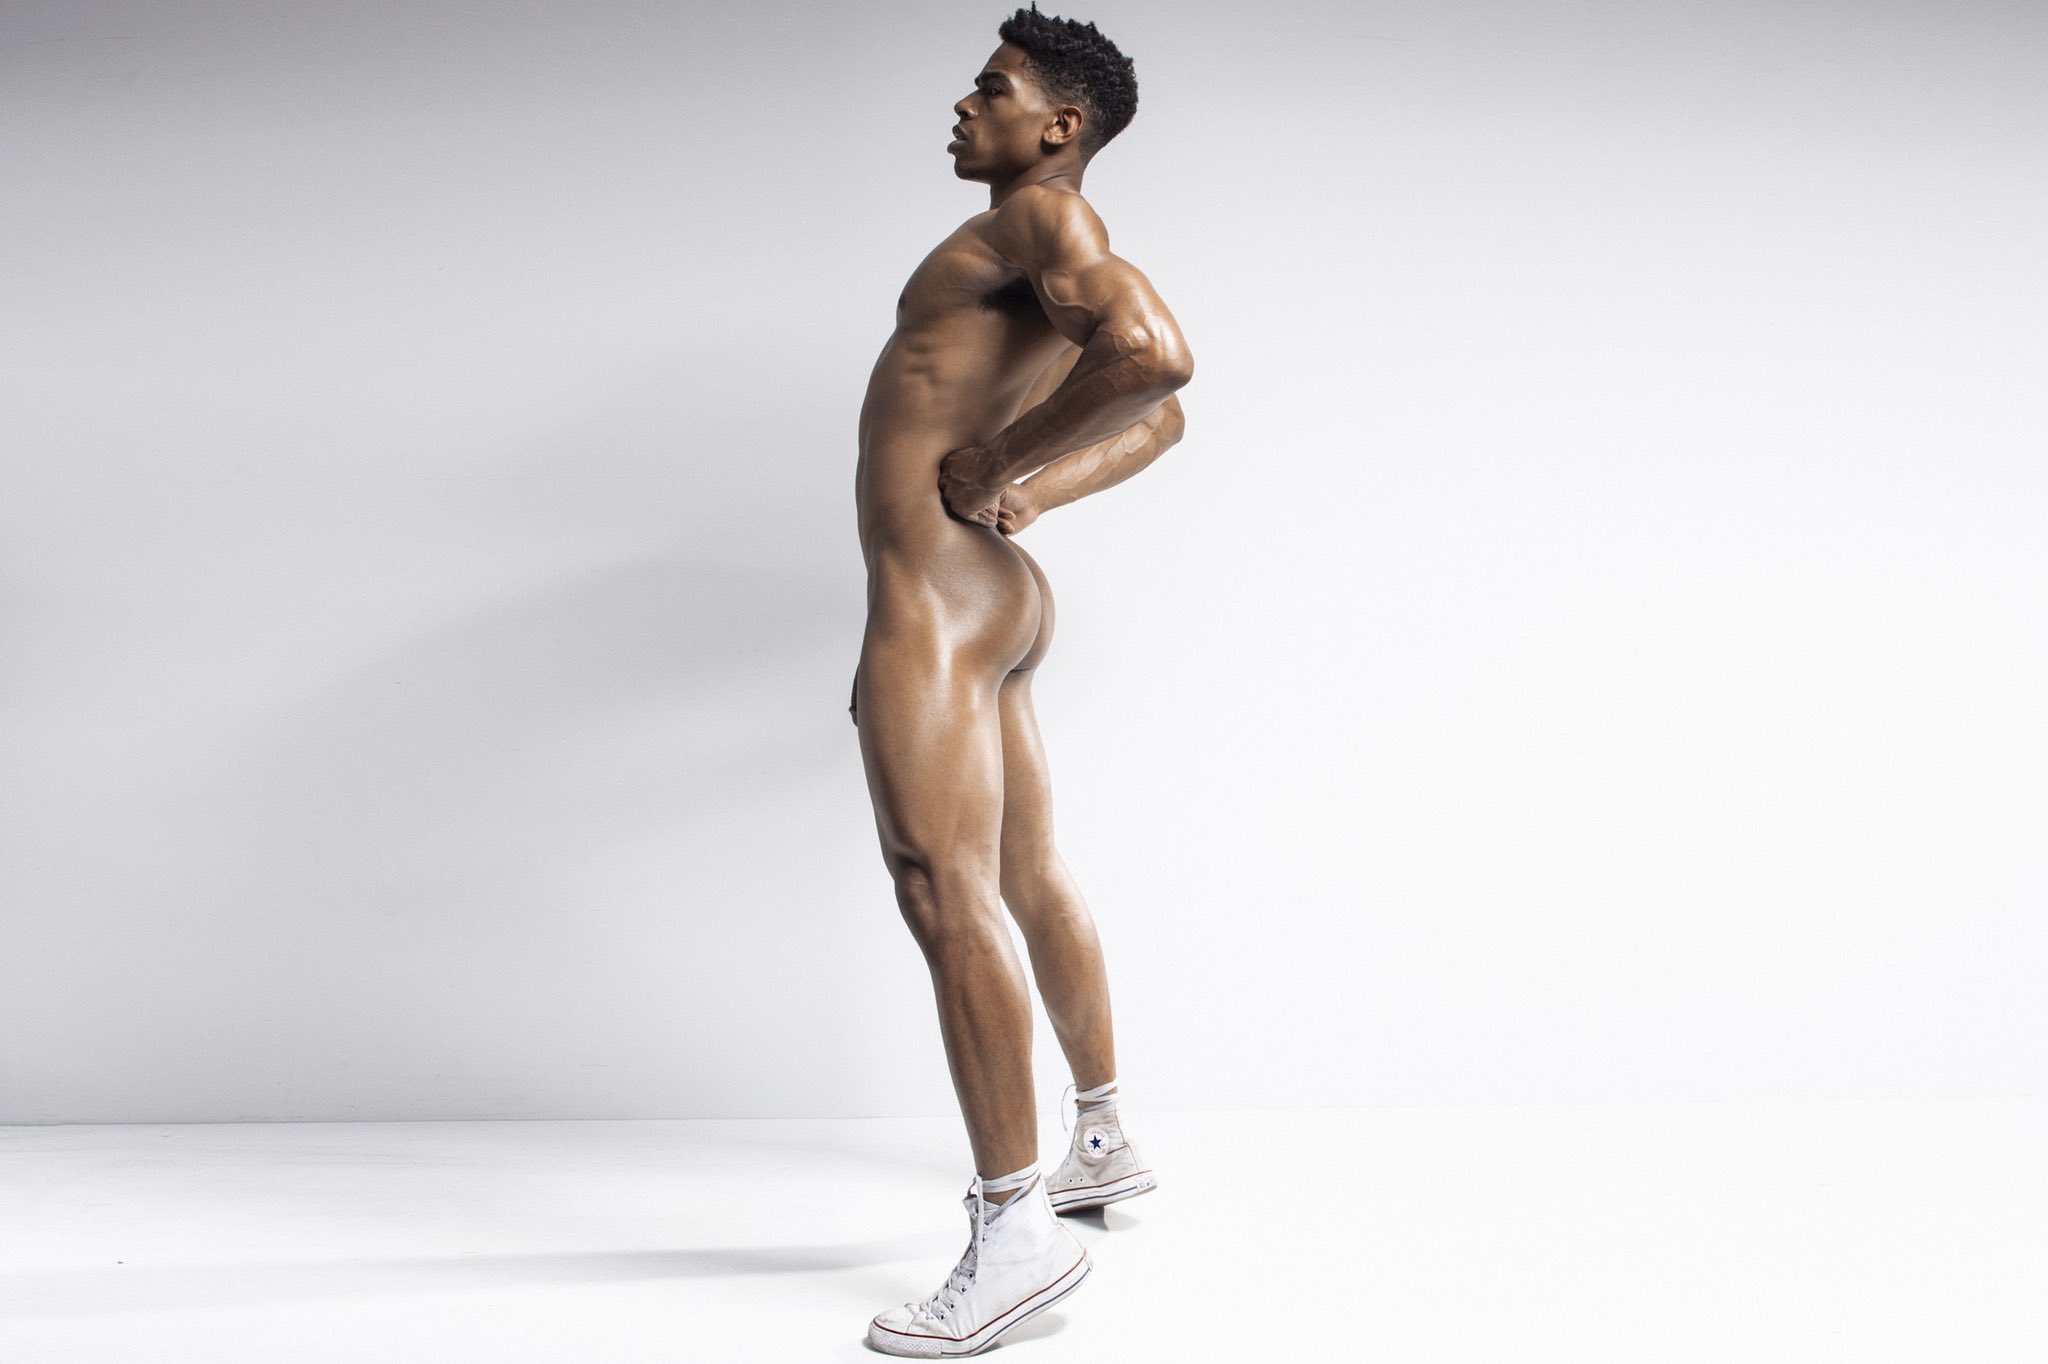 Model Denzell Theodore Naked.